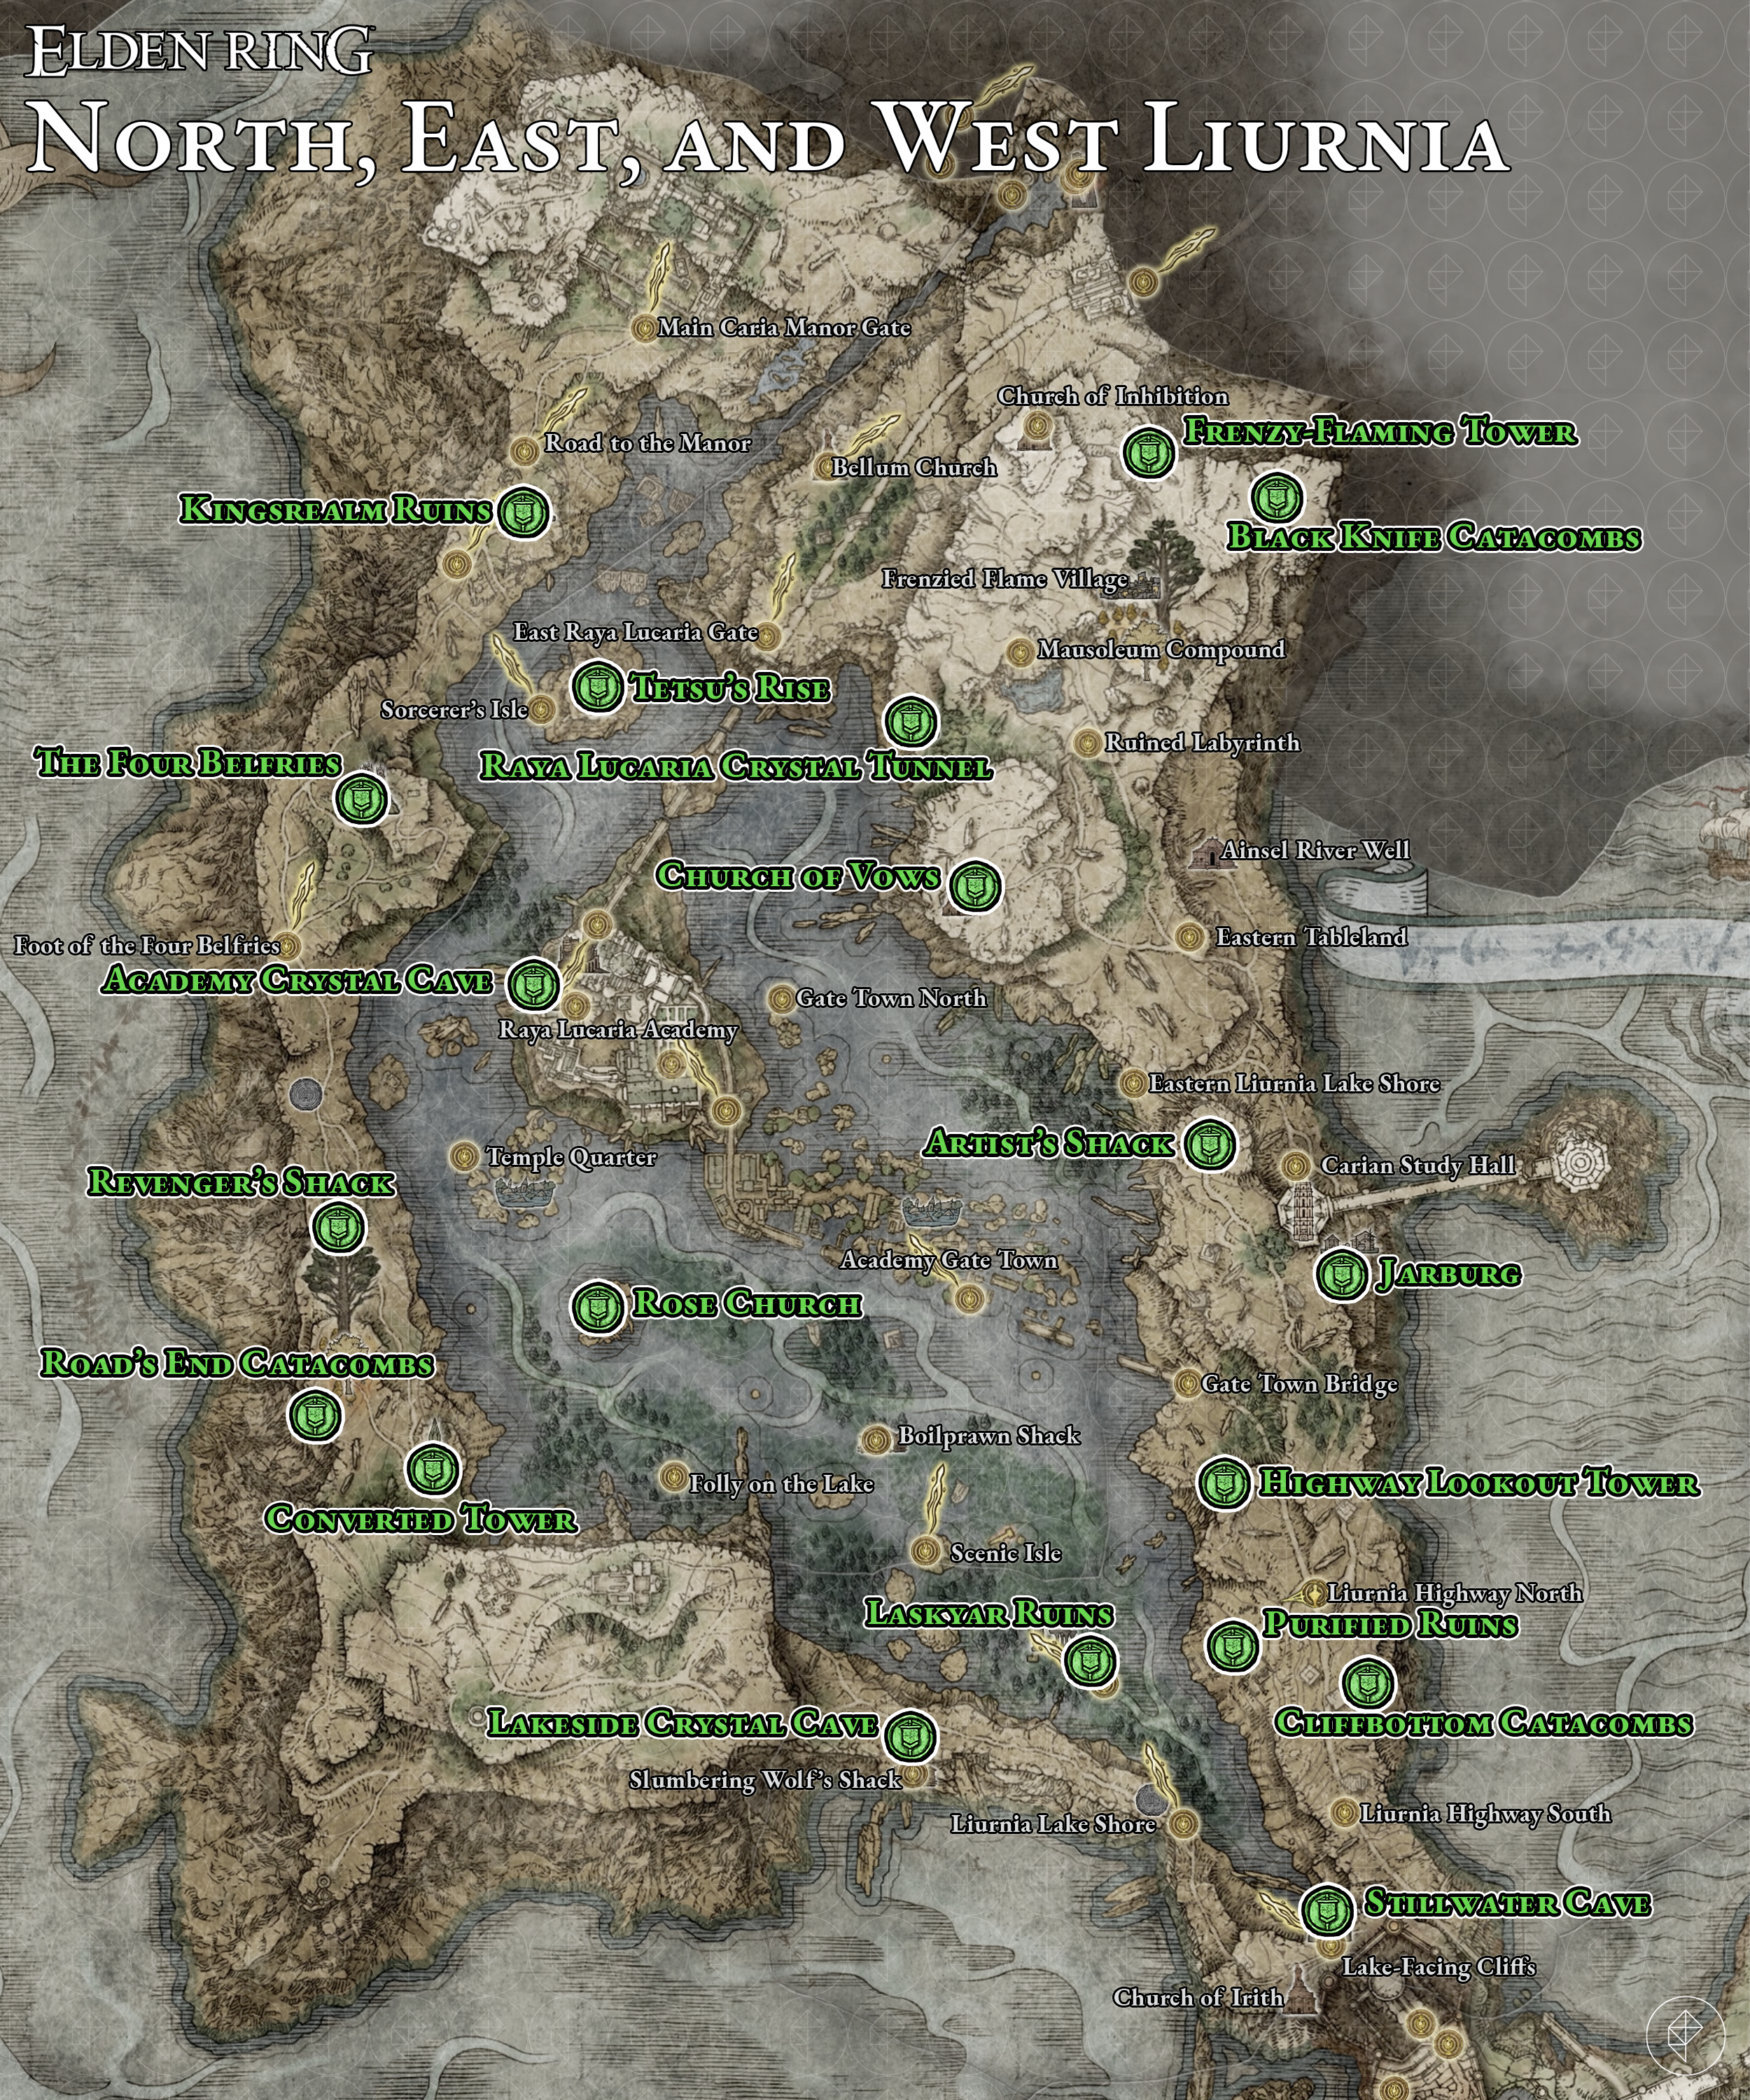 Every Liurnia dungeon location and their rewards in Elden Ring